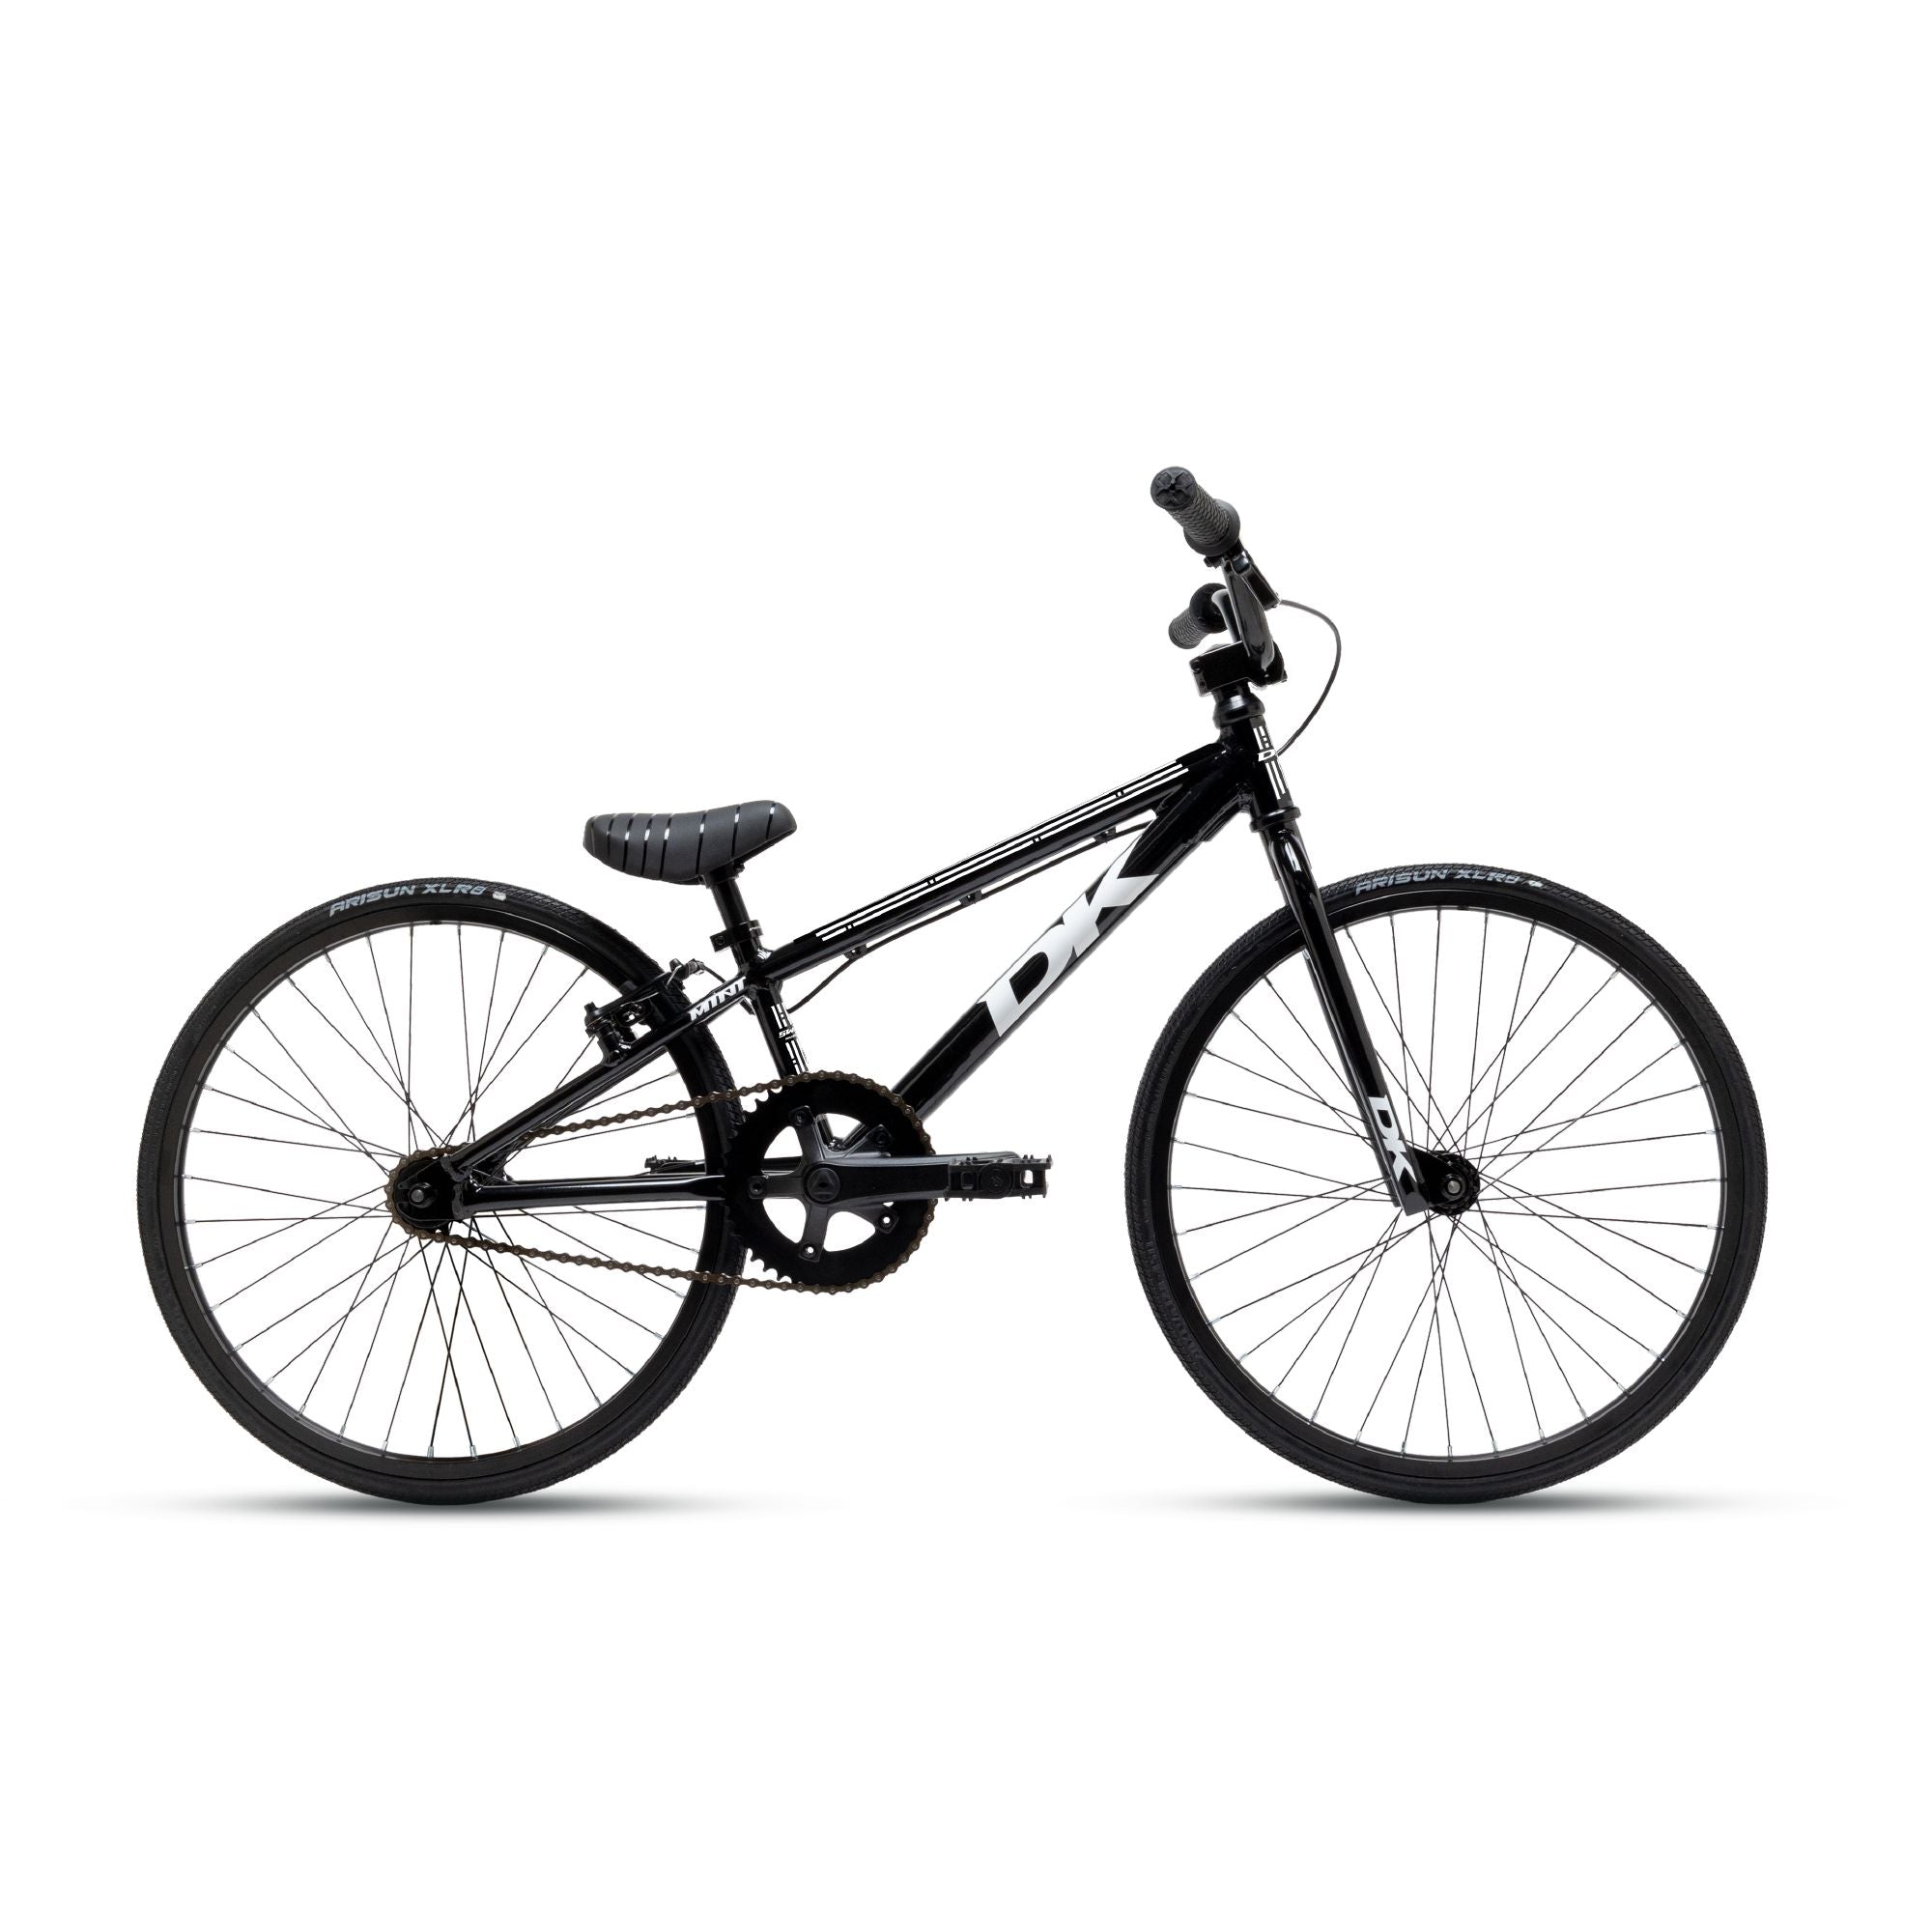 A black DK Swift Mini Bike Black/White with white lettering, featuring a single gear and no visible brakes, stands against a white background.